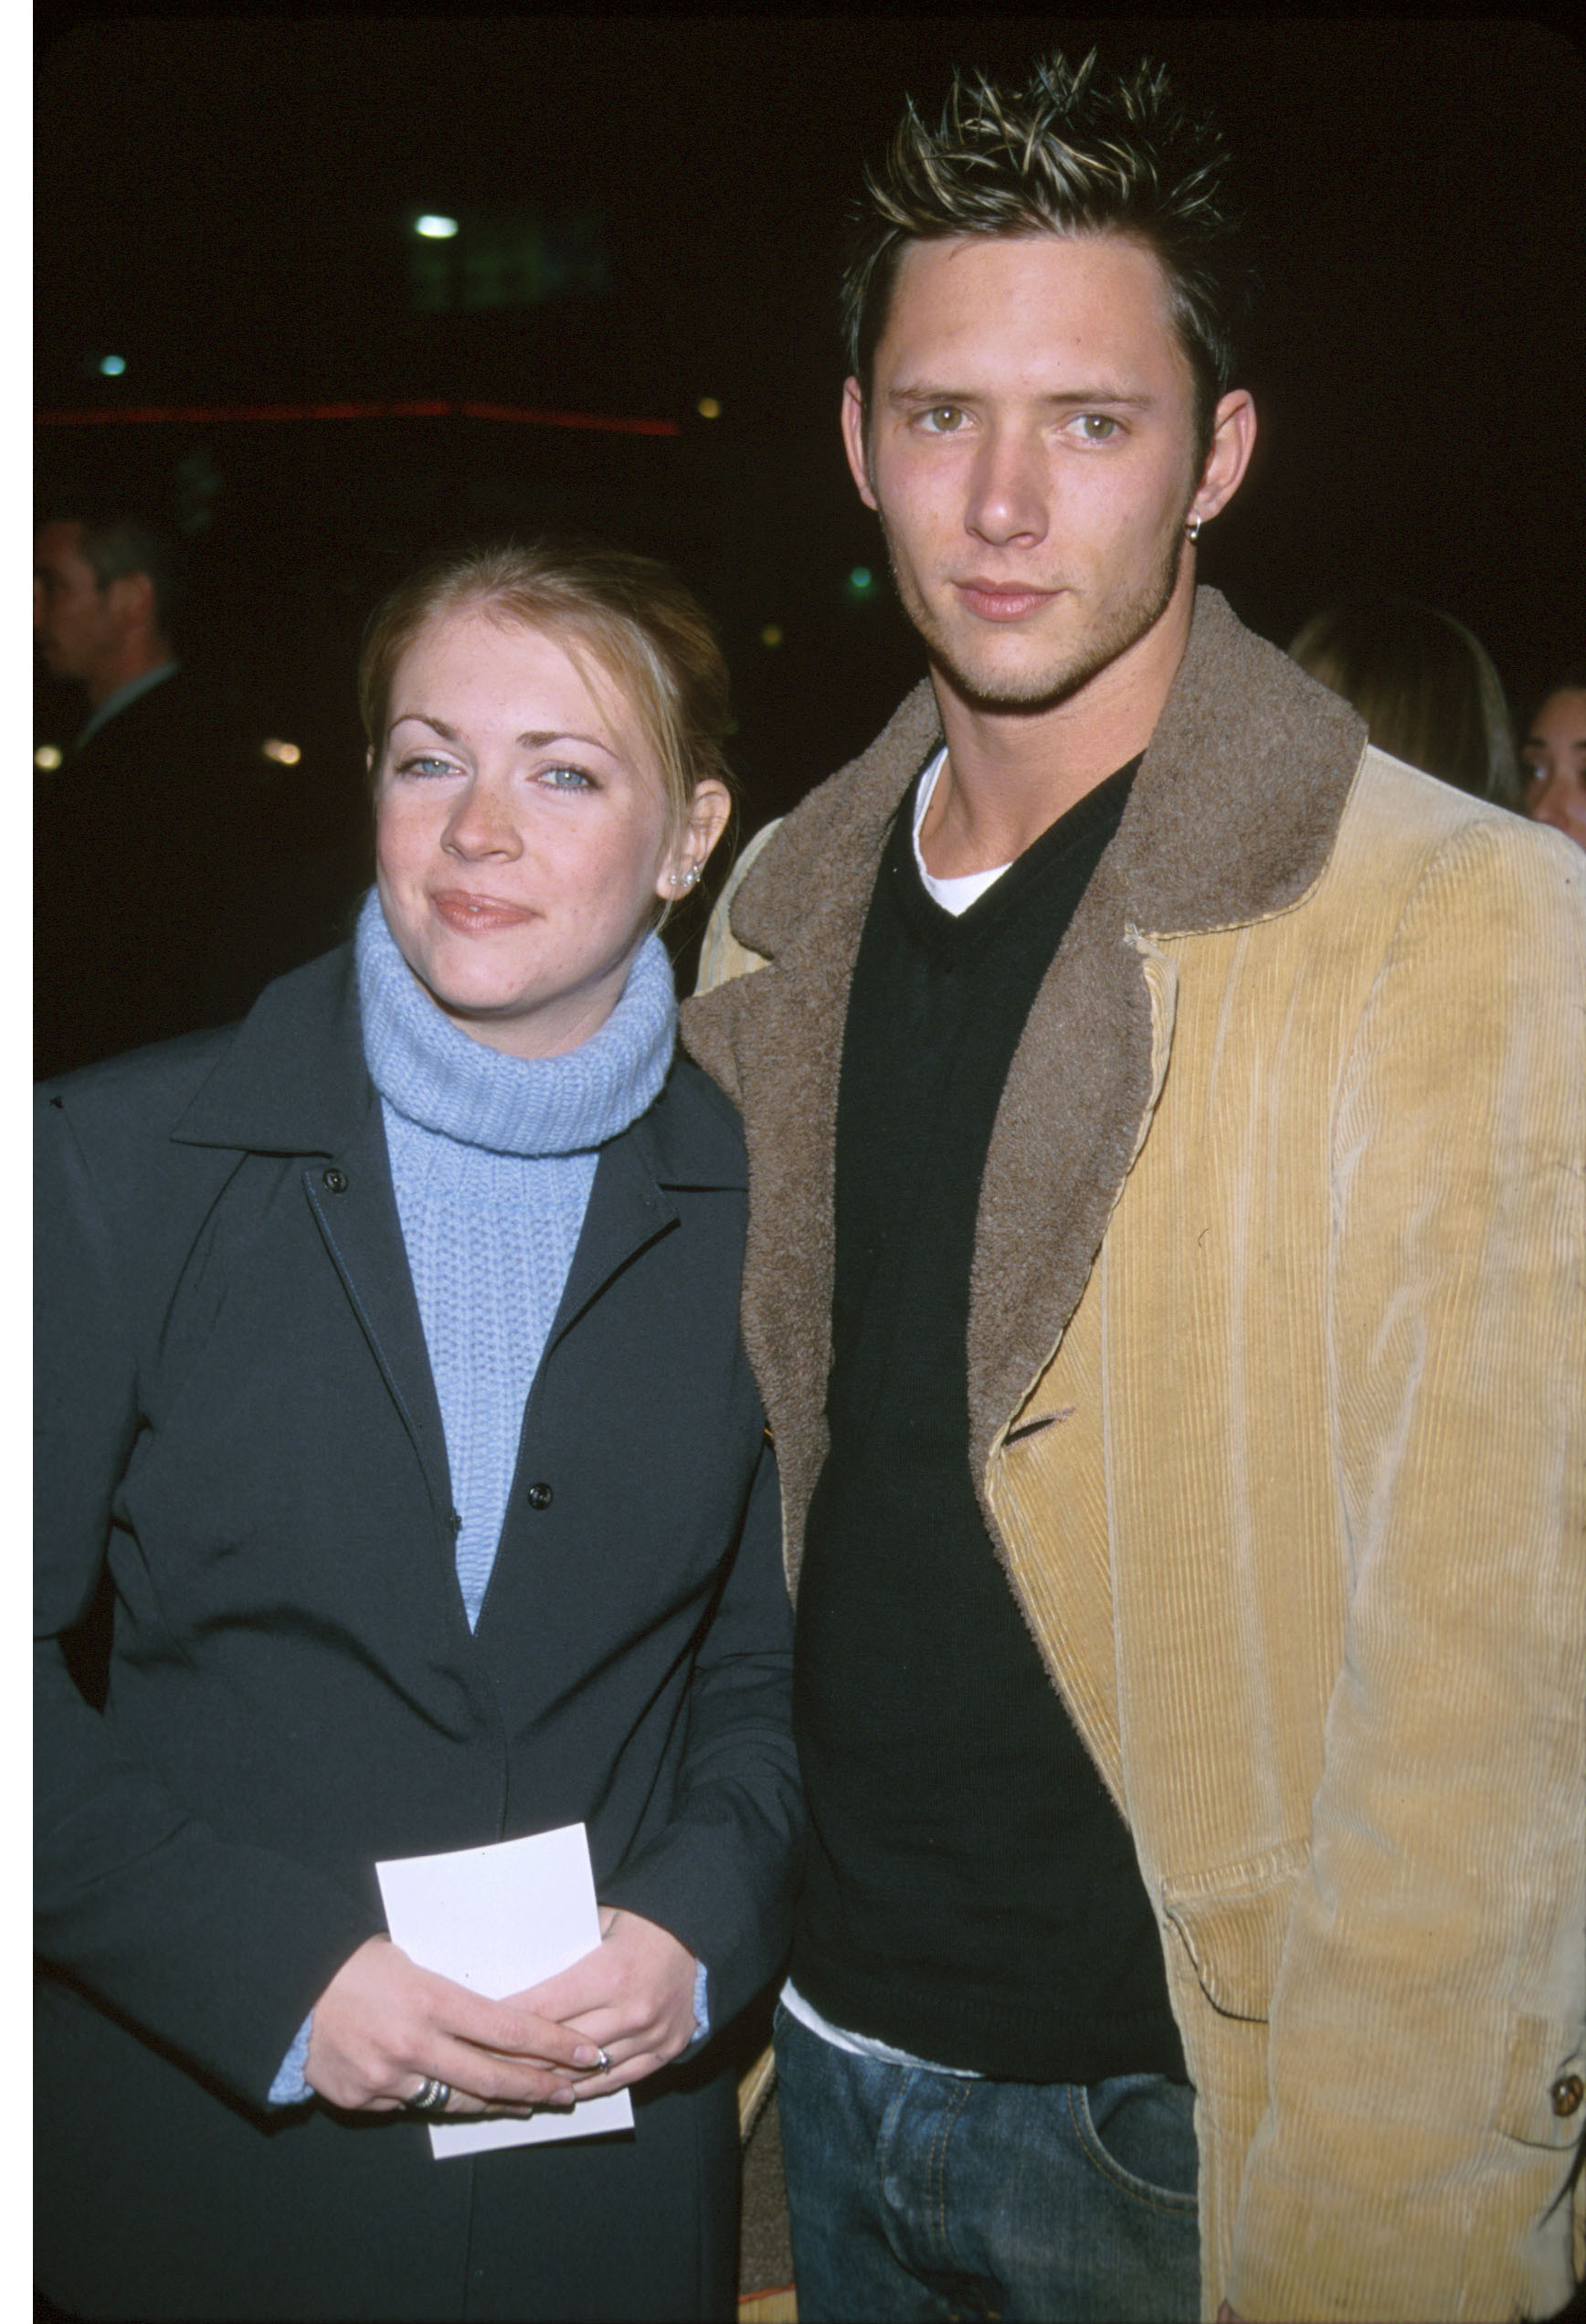 The child star and a guest during the "Girl Interrupted" premiere in Hollywood, California, on December 8, 1999 | Source: Getty Images